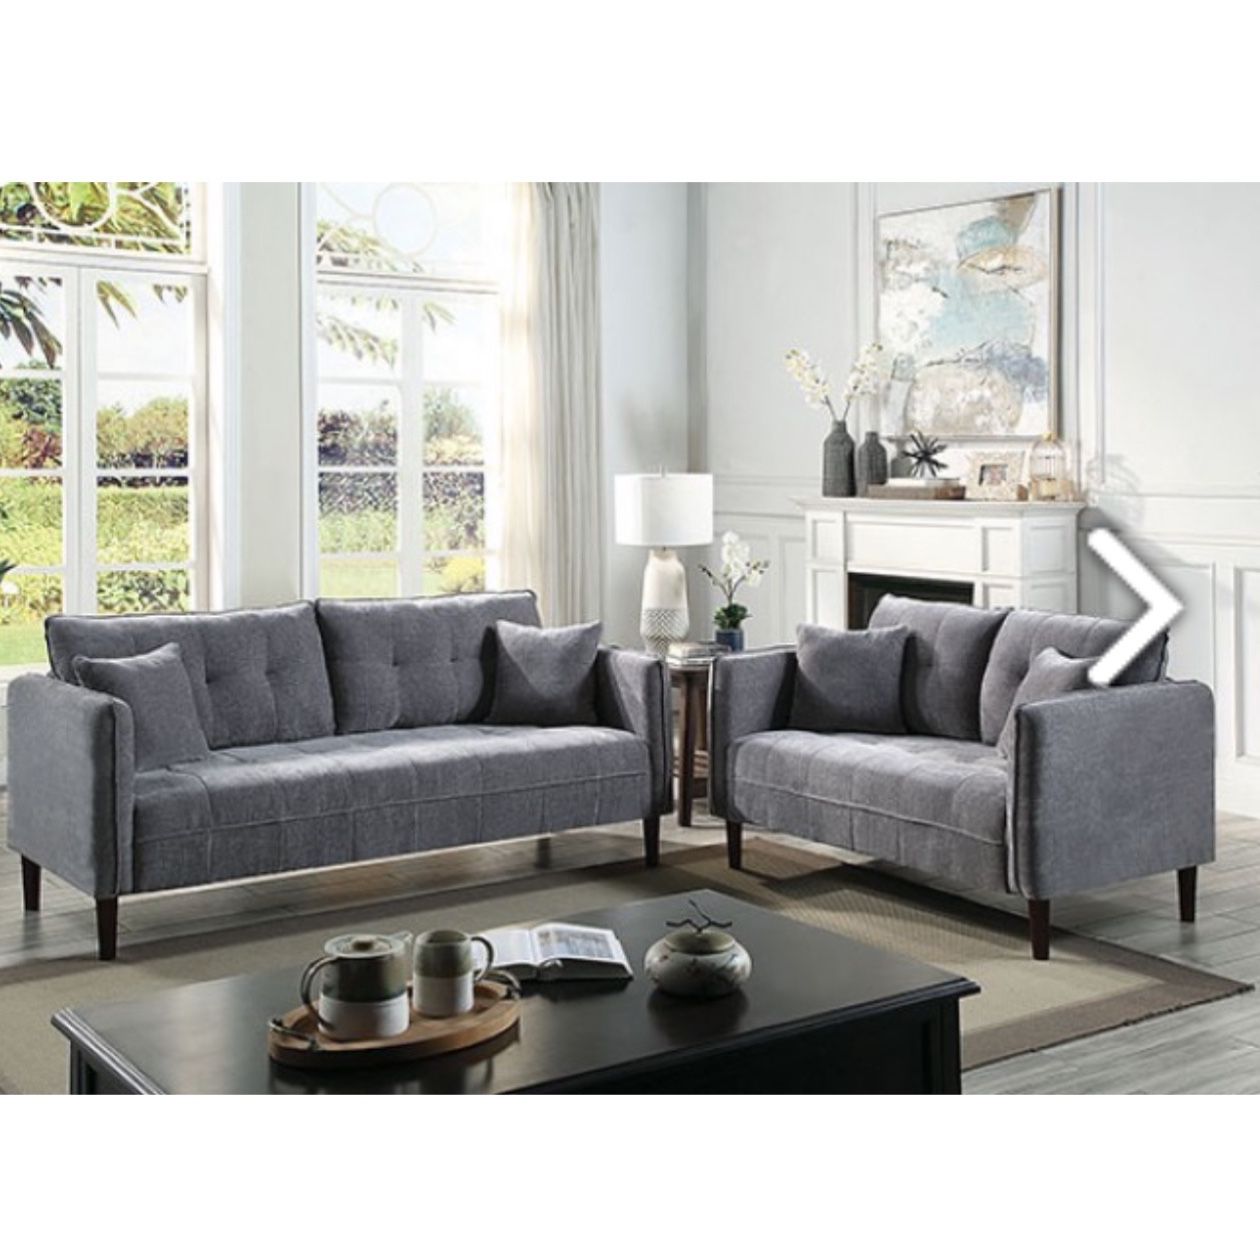 SOFA & LOVESEAT (FREE DELIVERY) 